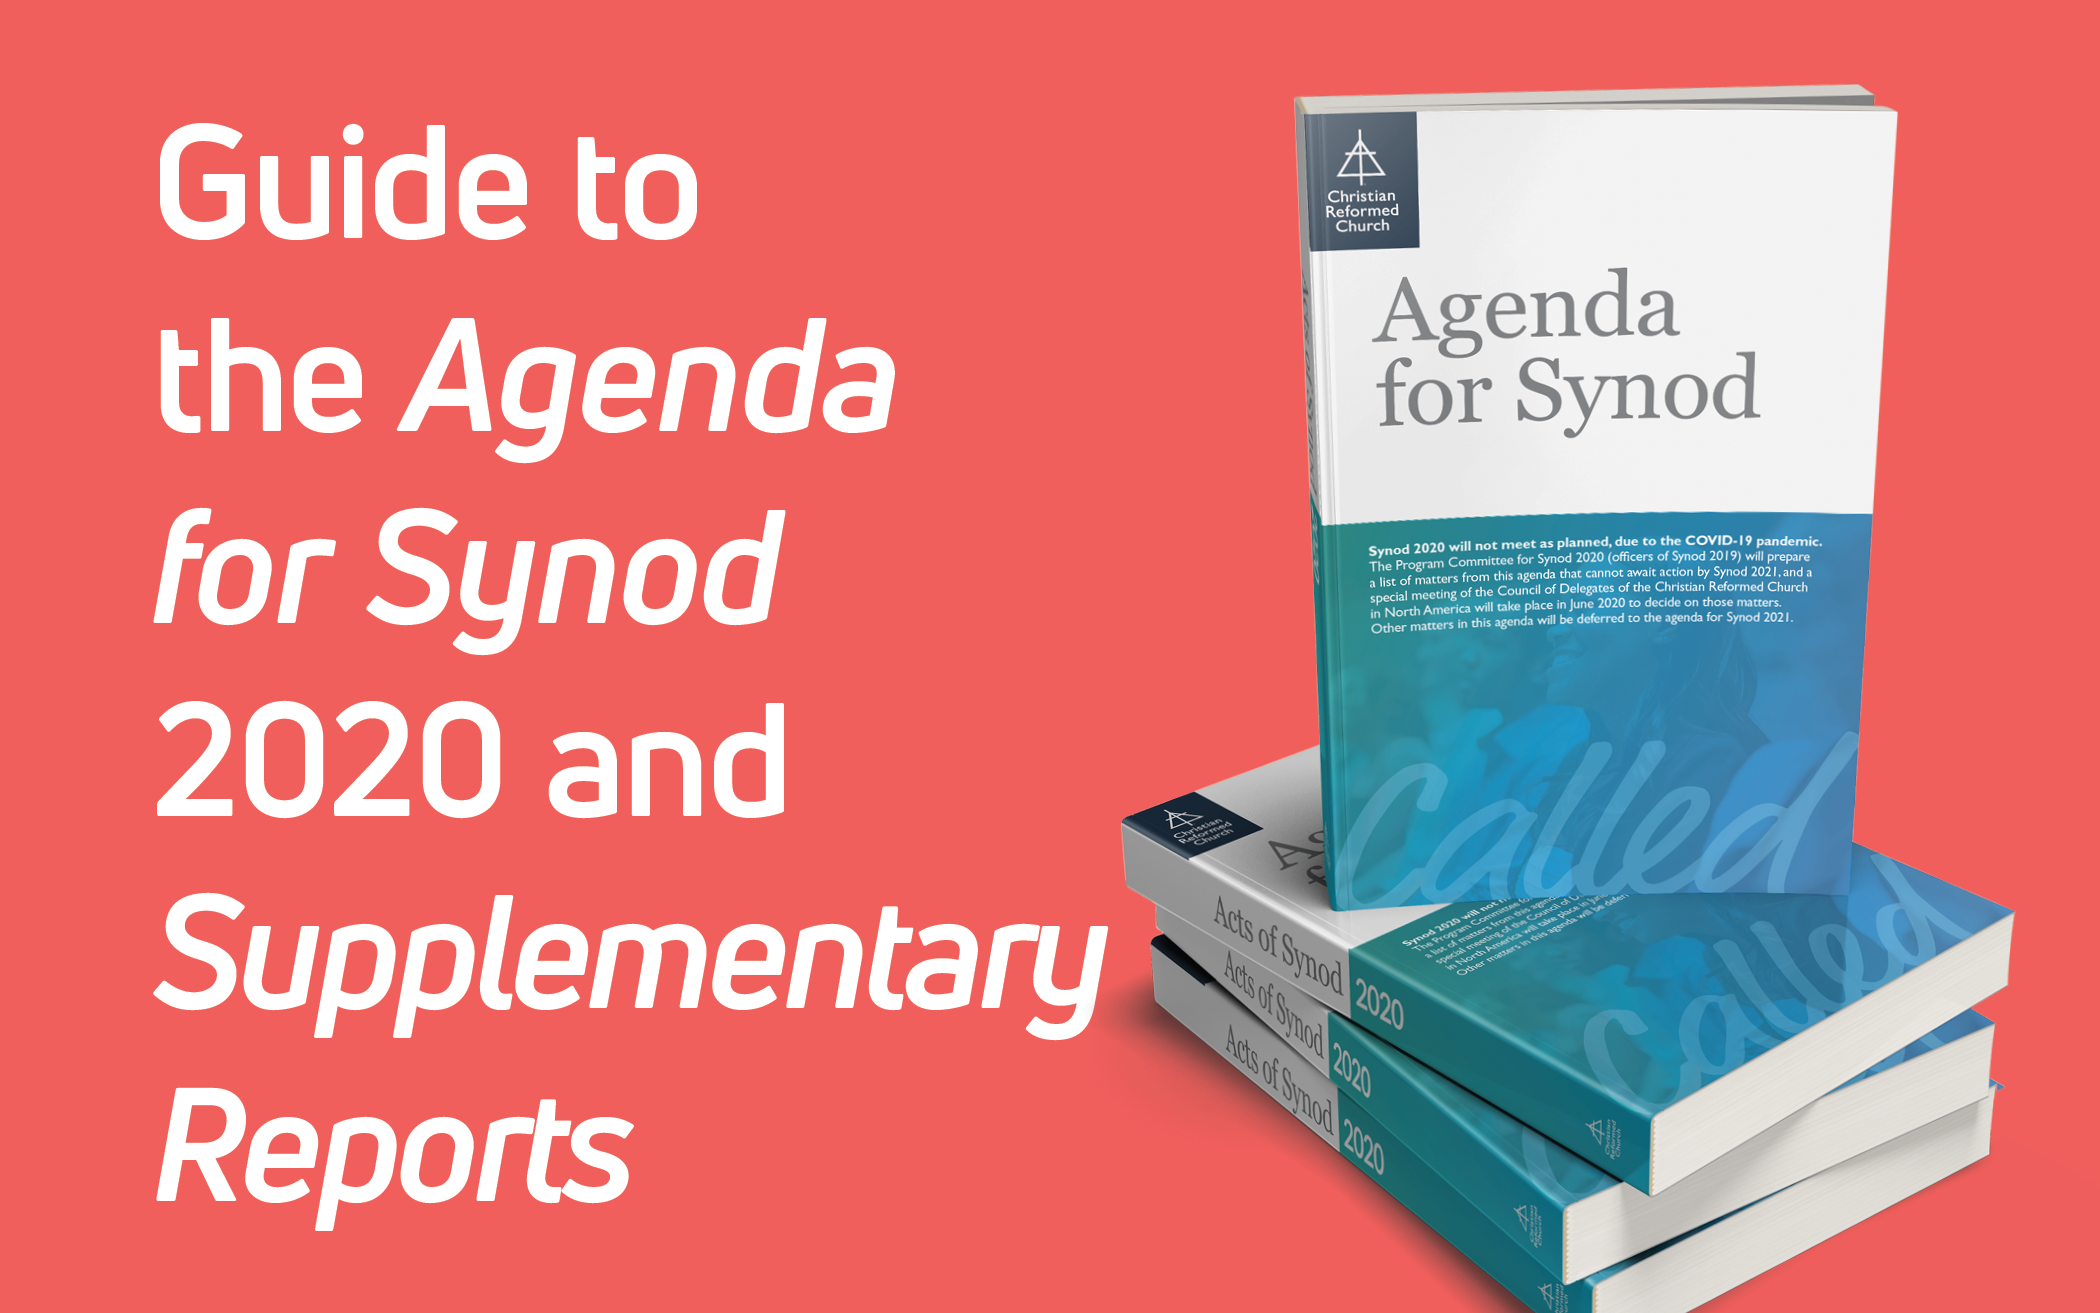 Guide to the Agenda for Synod 2020 